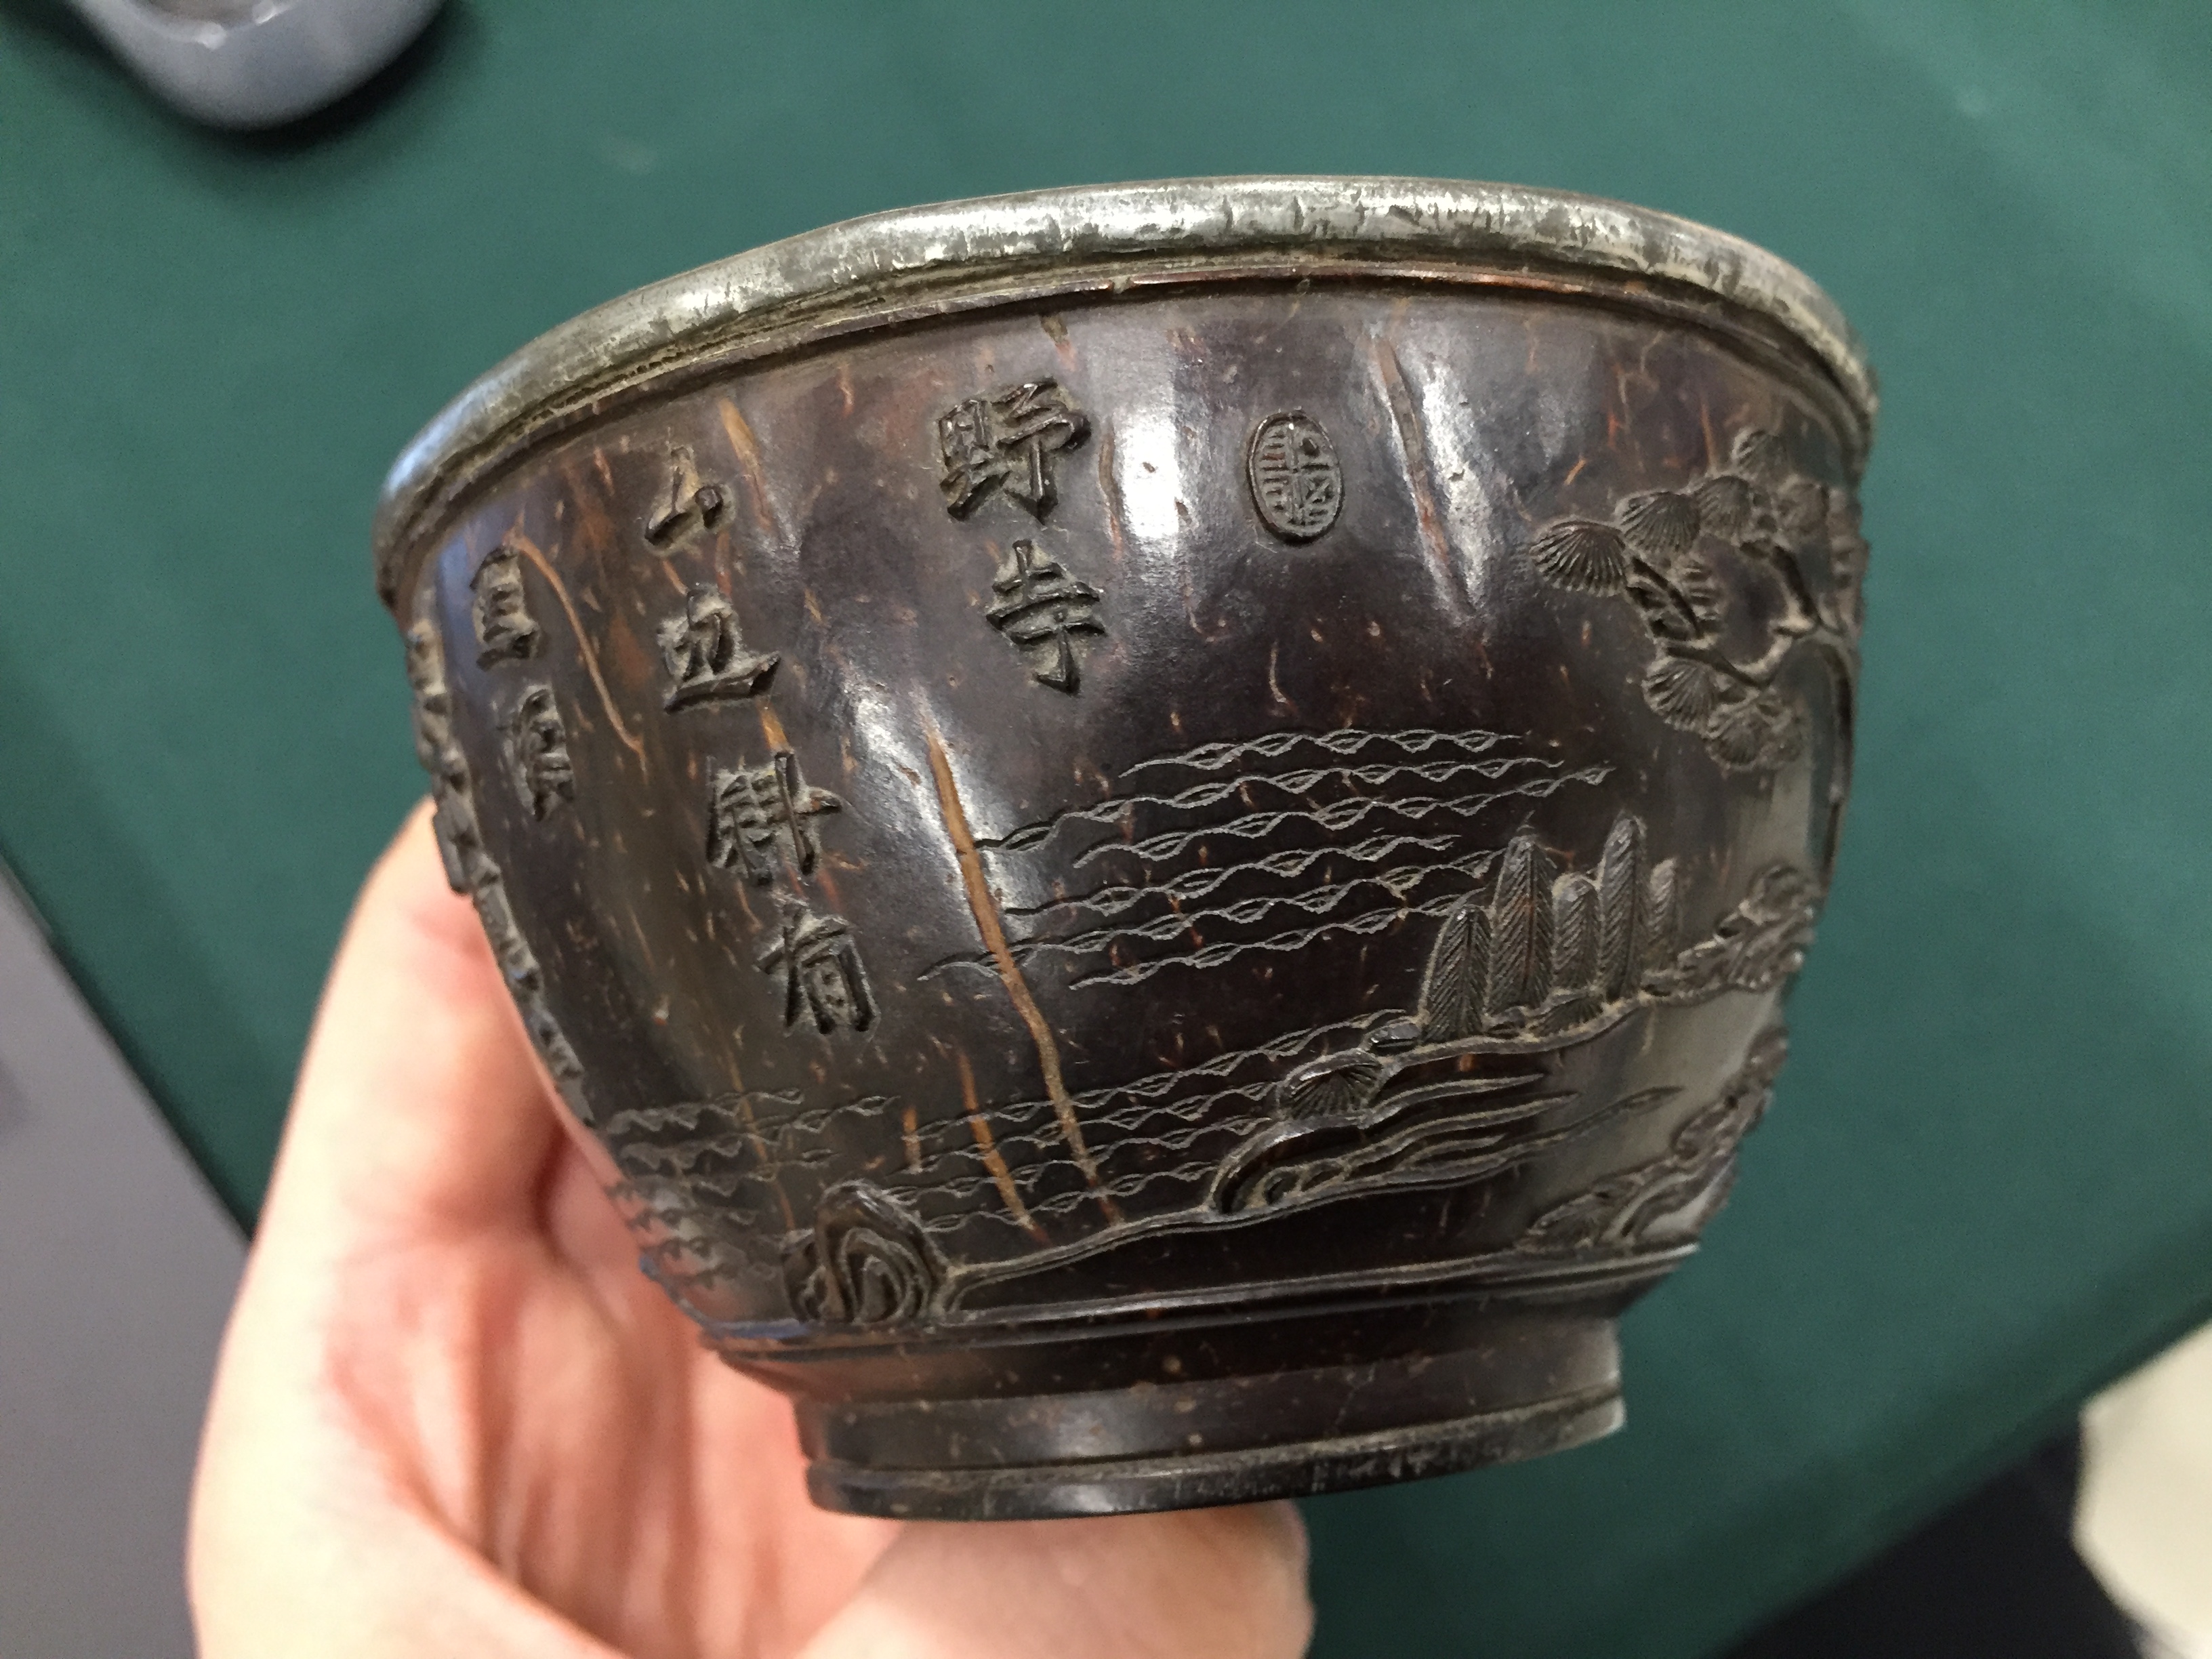 A FINE CHINESE CARVED COCONUT CUP 清十八世紀 椰殼刻山水圖紋盃 - Image 11 of 13